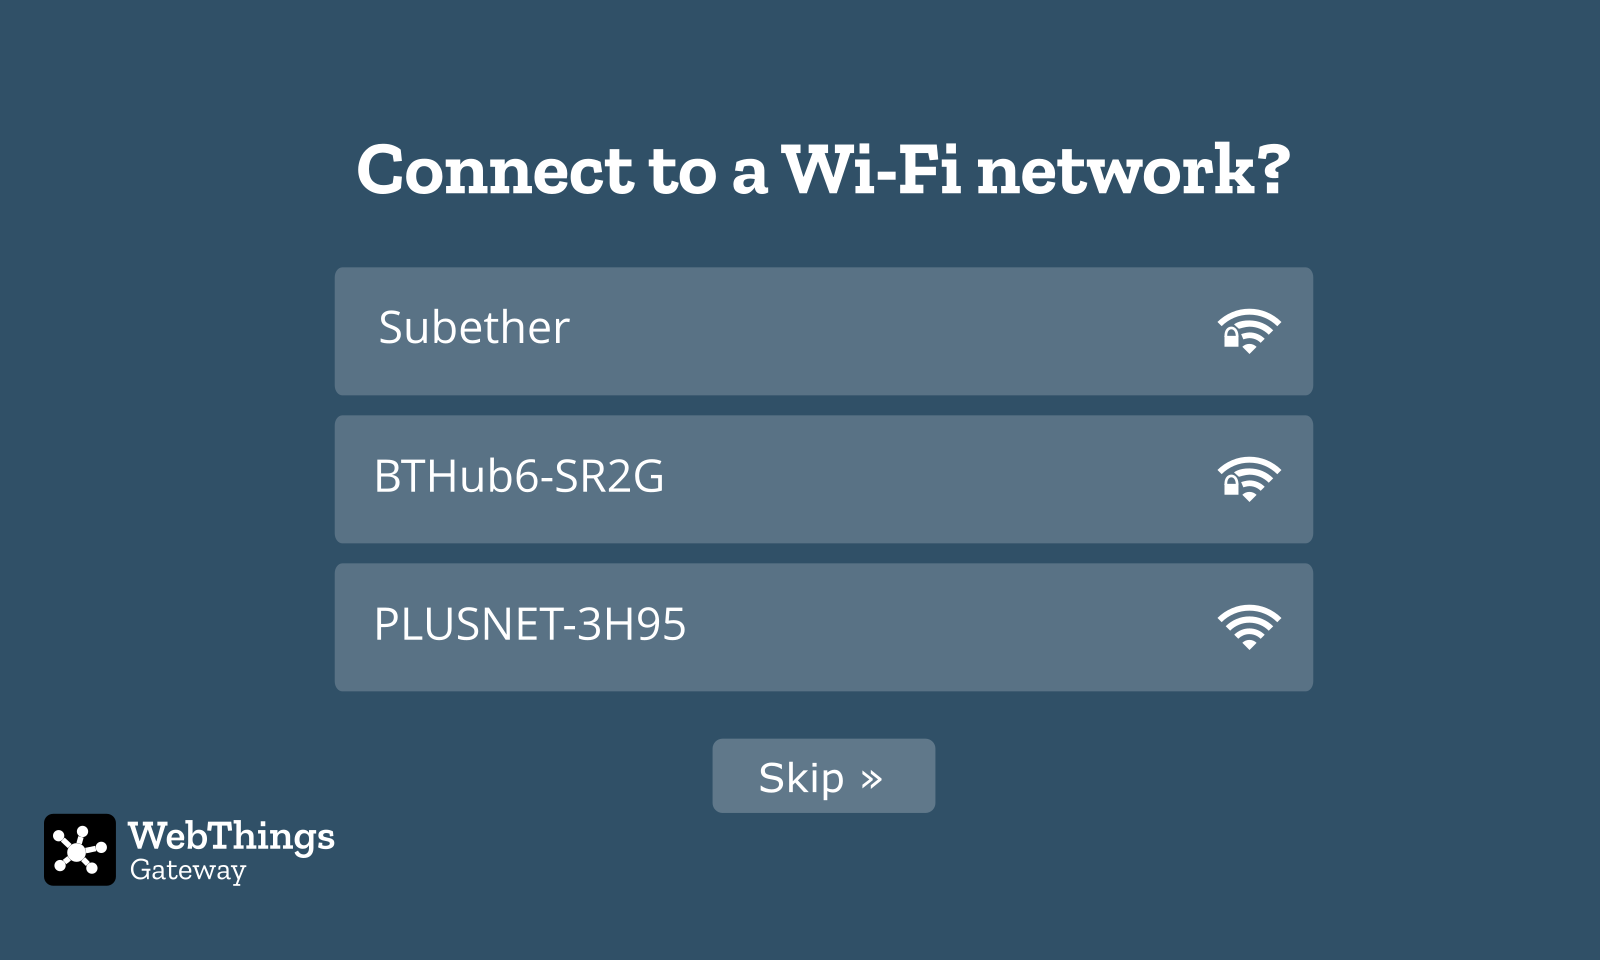 A screenshot showing the names of nearby Wi-Fi networks